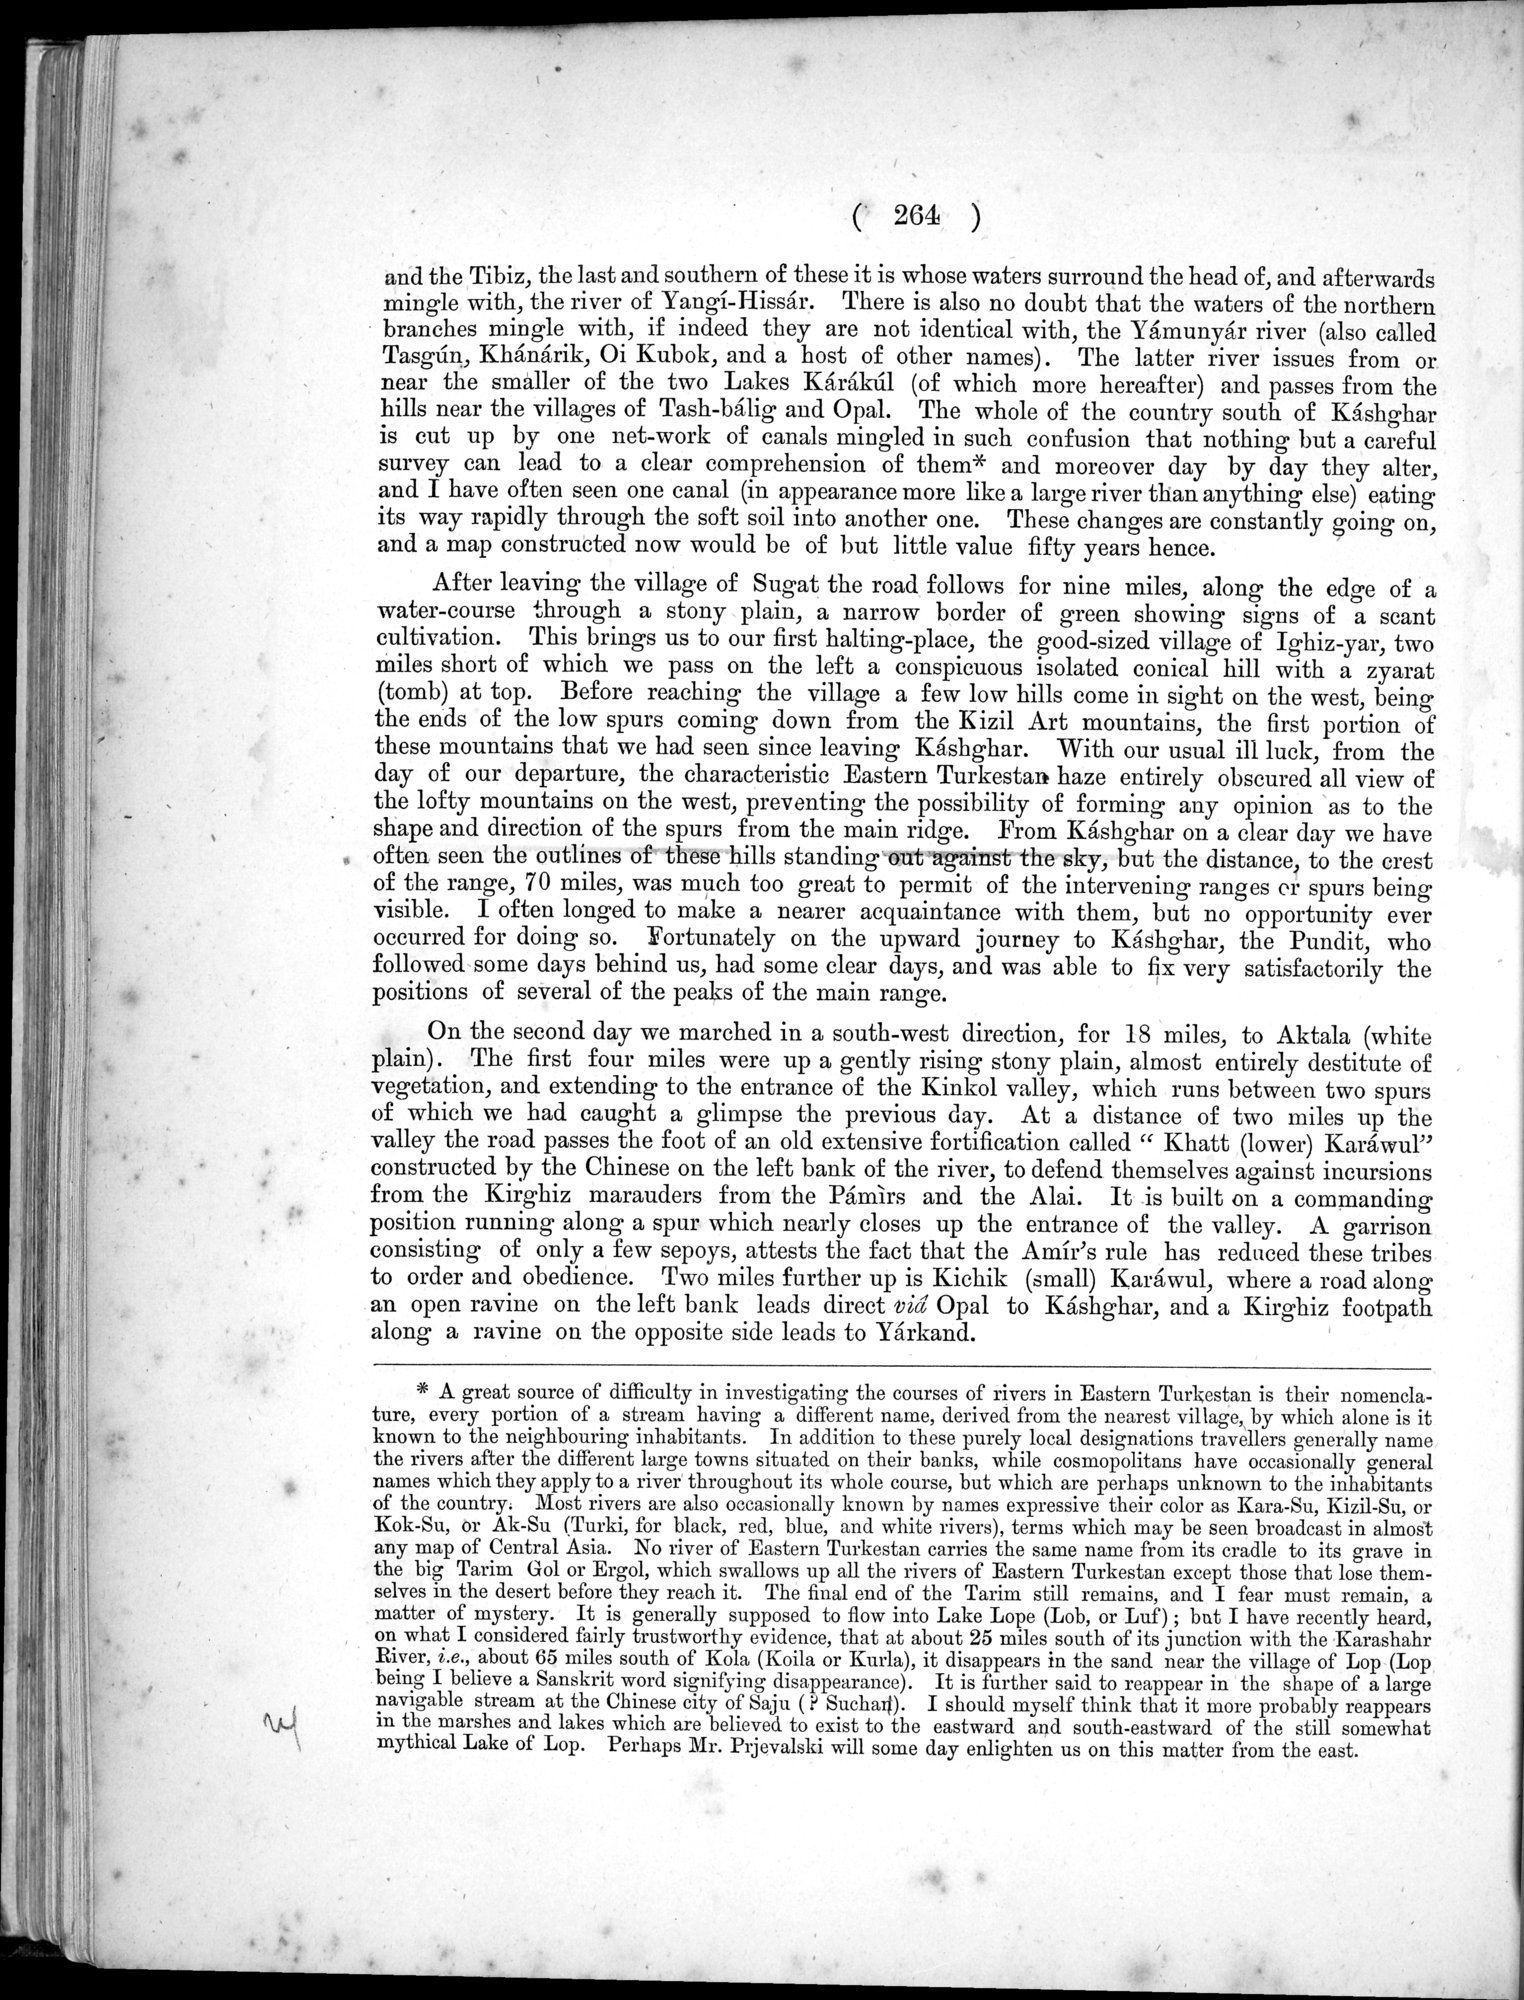 Report of a Mission to Yarkund in 1873 : vol.1 / Page 380 (Grayscale High Resolution Image)